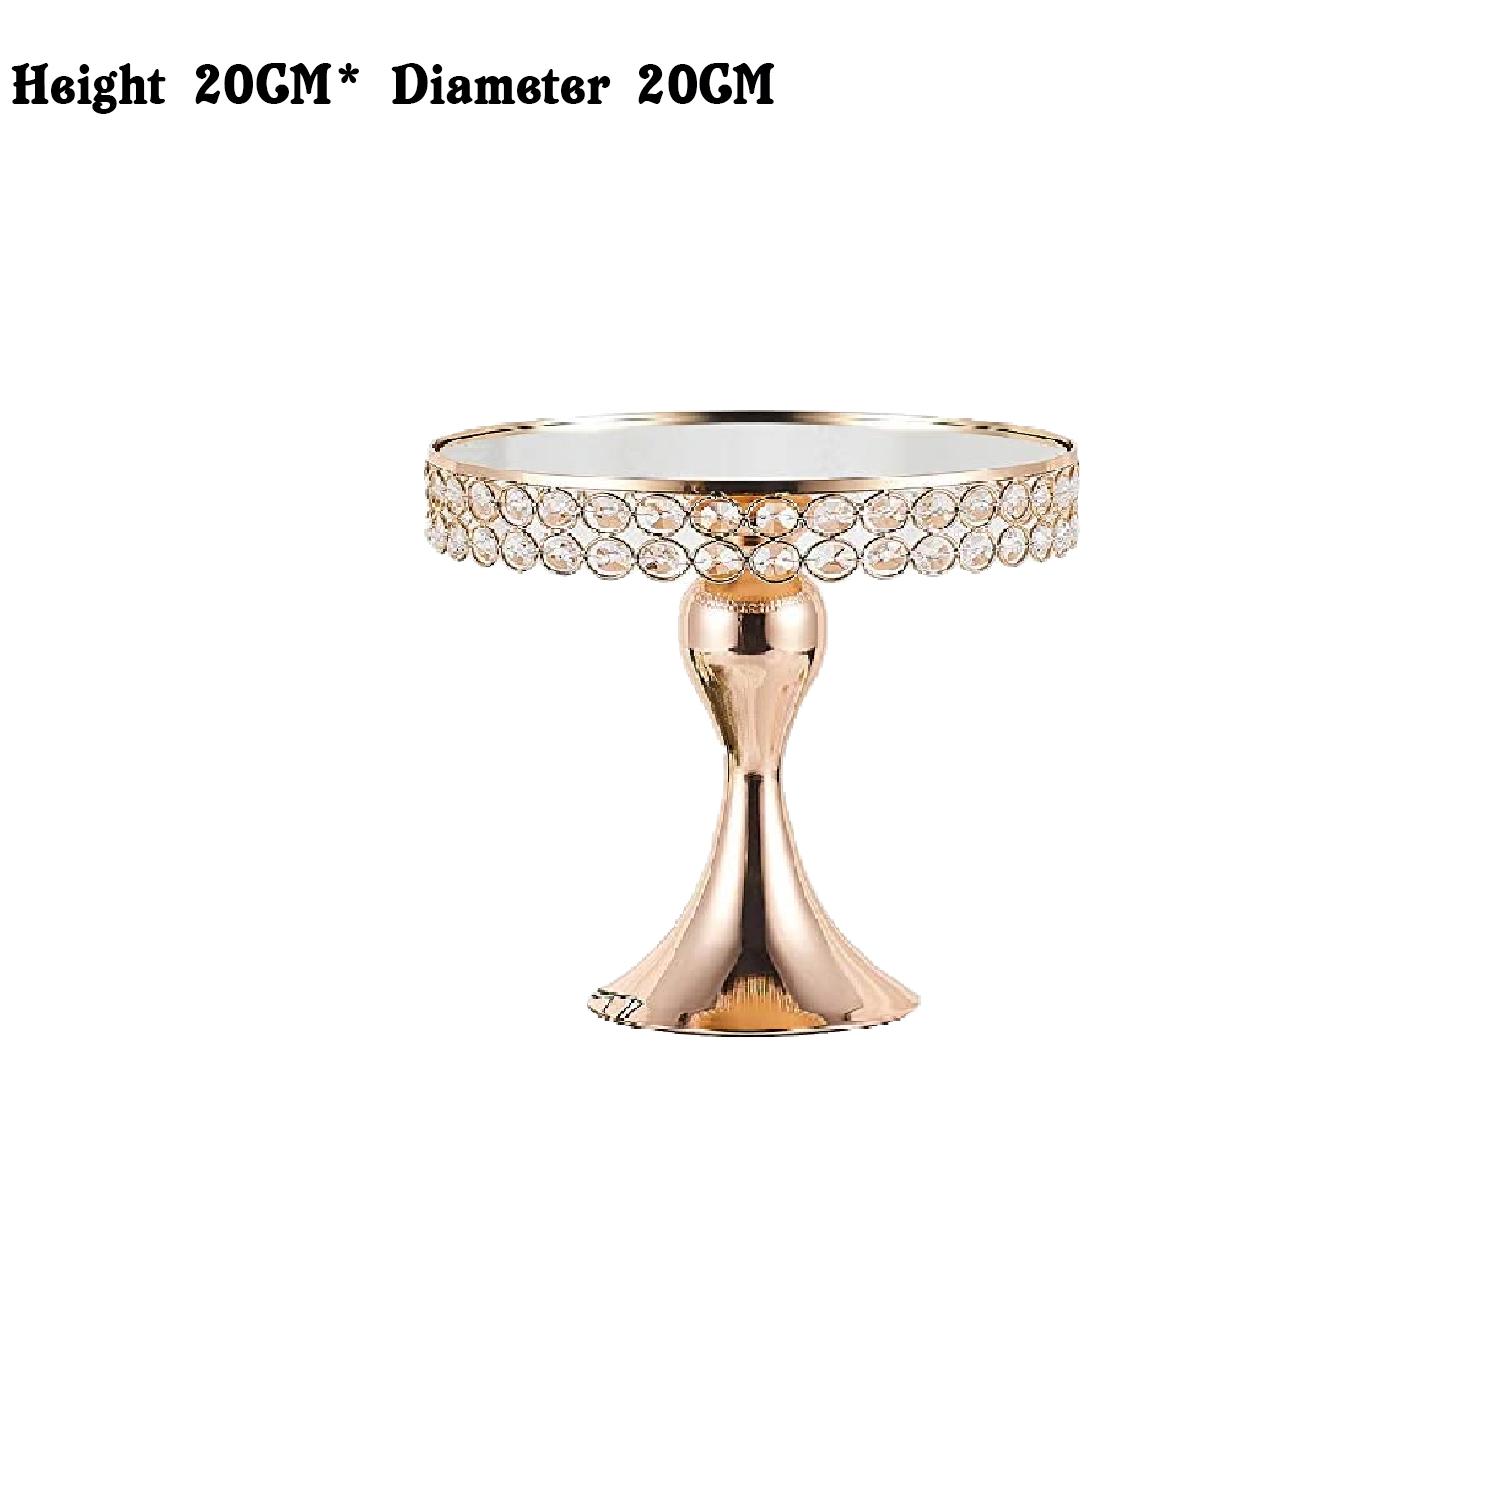 GOLD CRYSTAL CAKE STAND 1PC H 20CM* D 20CM